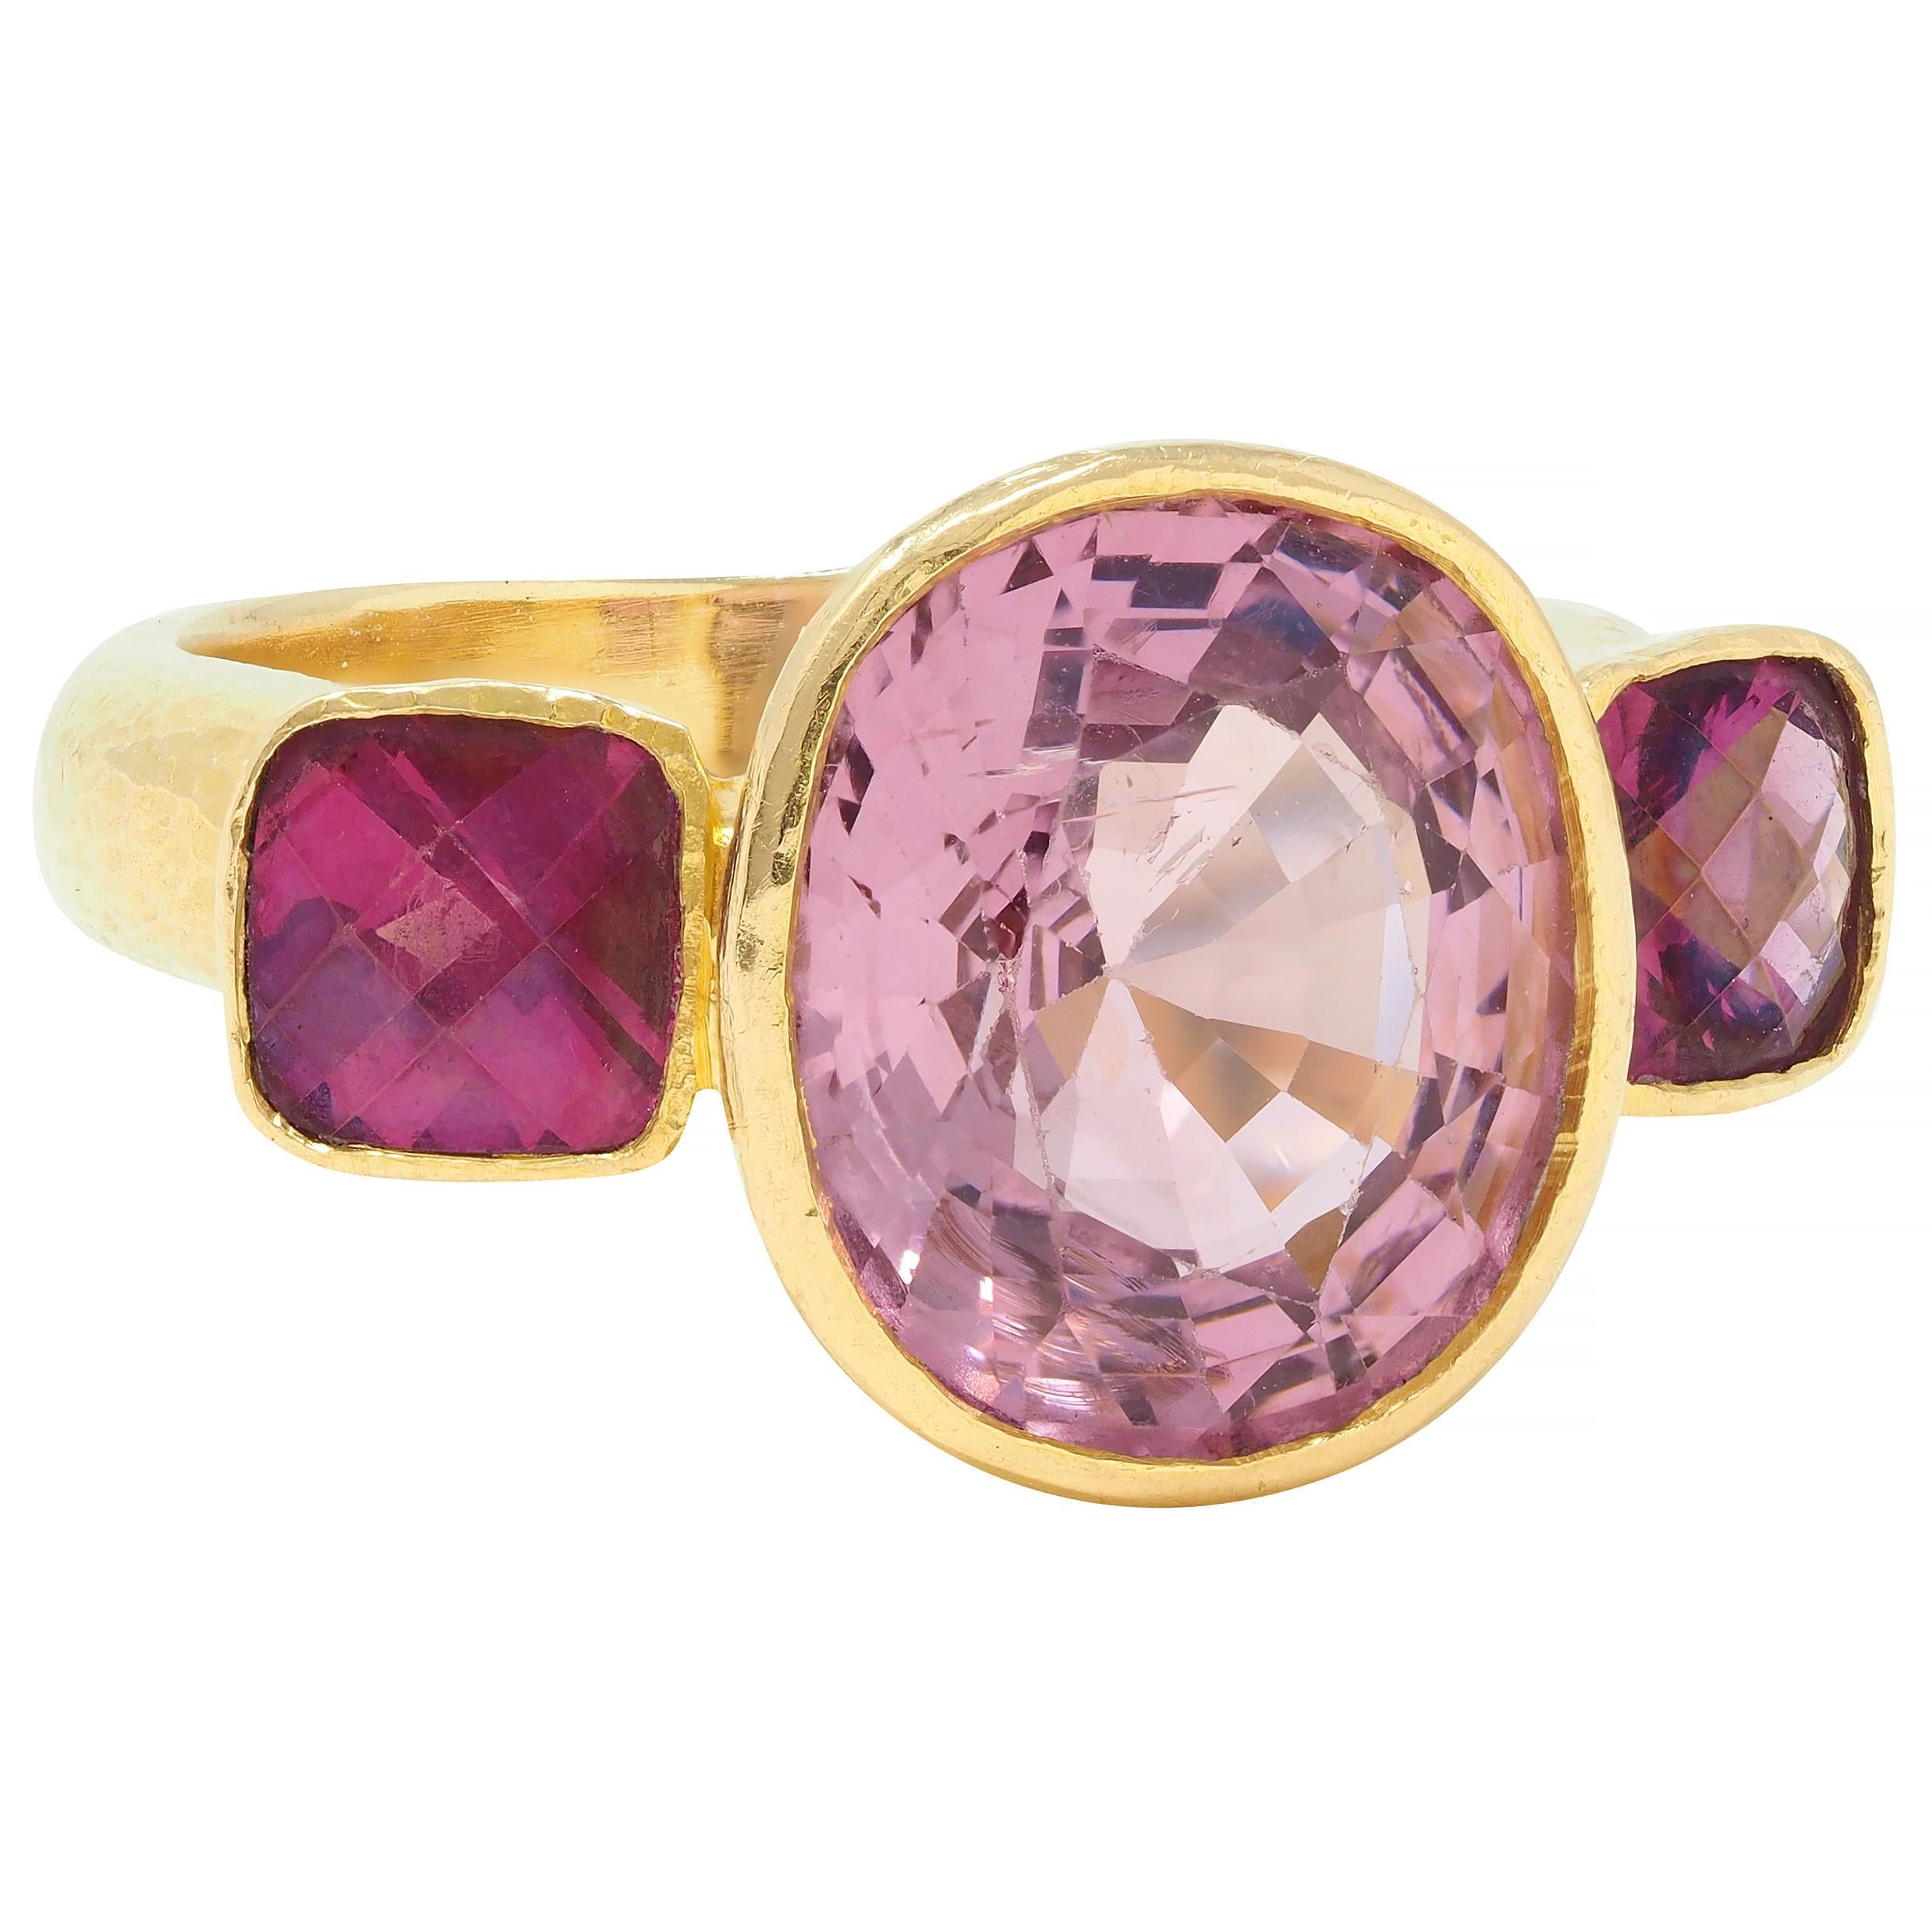 Three stone ring centers a mixed oval cut spinel weighing approximately 4.80 carats
Natural light pink in color and semi-transparent
Flanked by 5.0 mm cushion cut rhodolite garnets 
Well-matched transparent purplish red in color
Each bezel set east